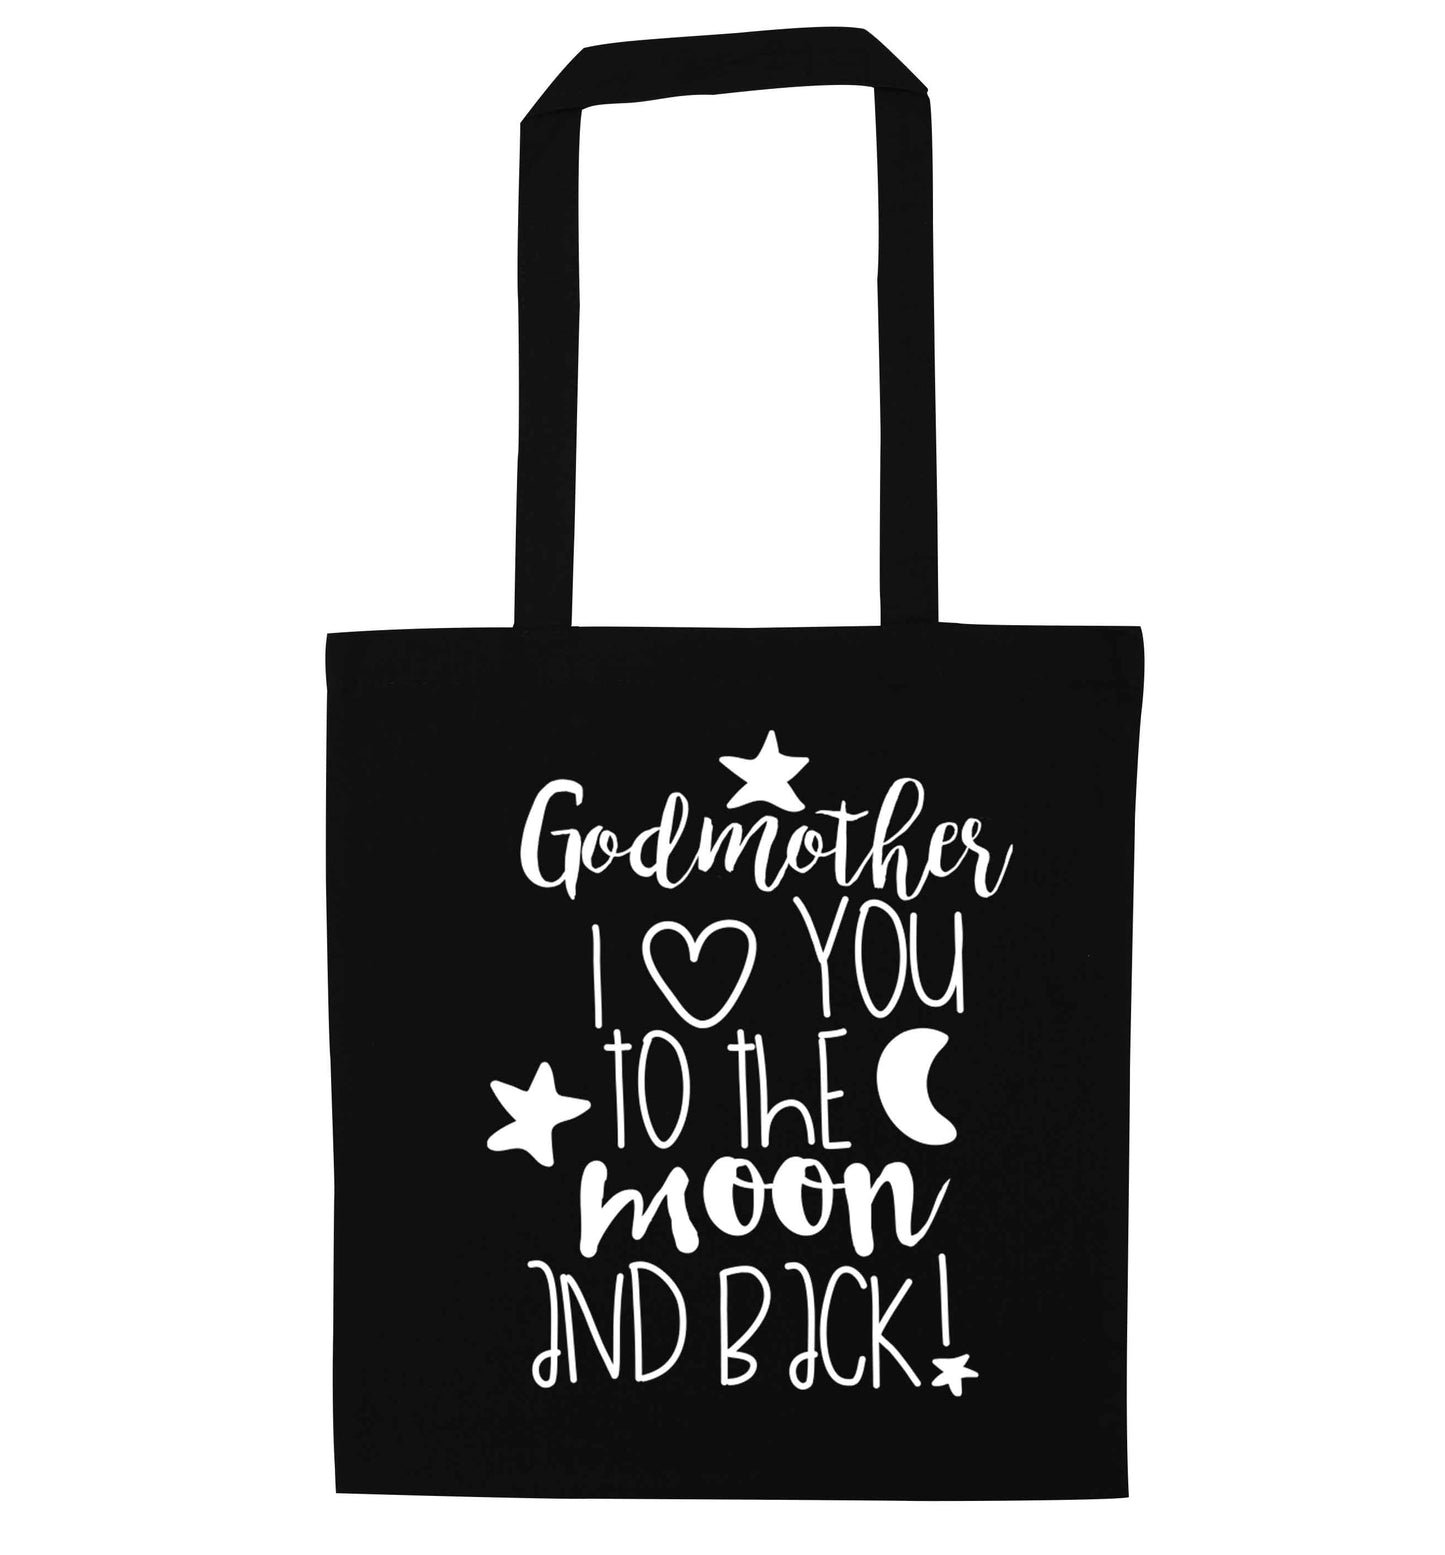 Godmother I love you to the moon and back black tote bag